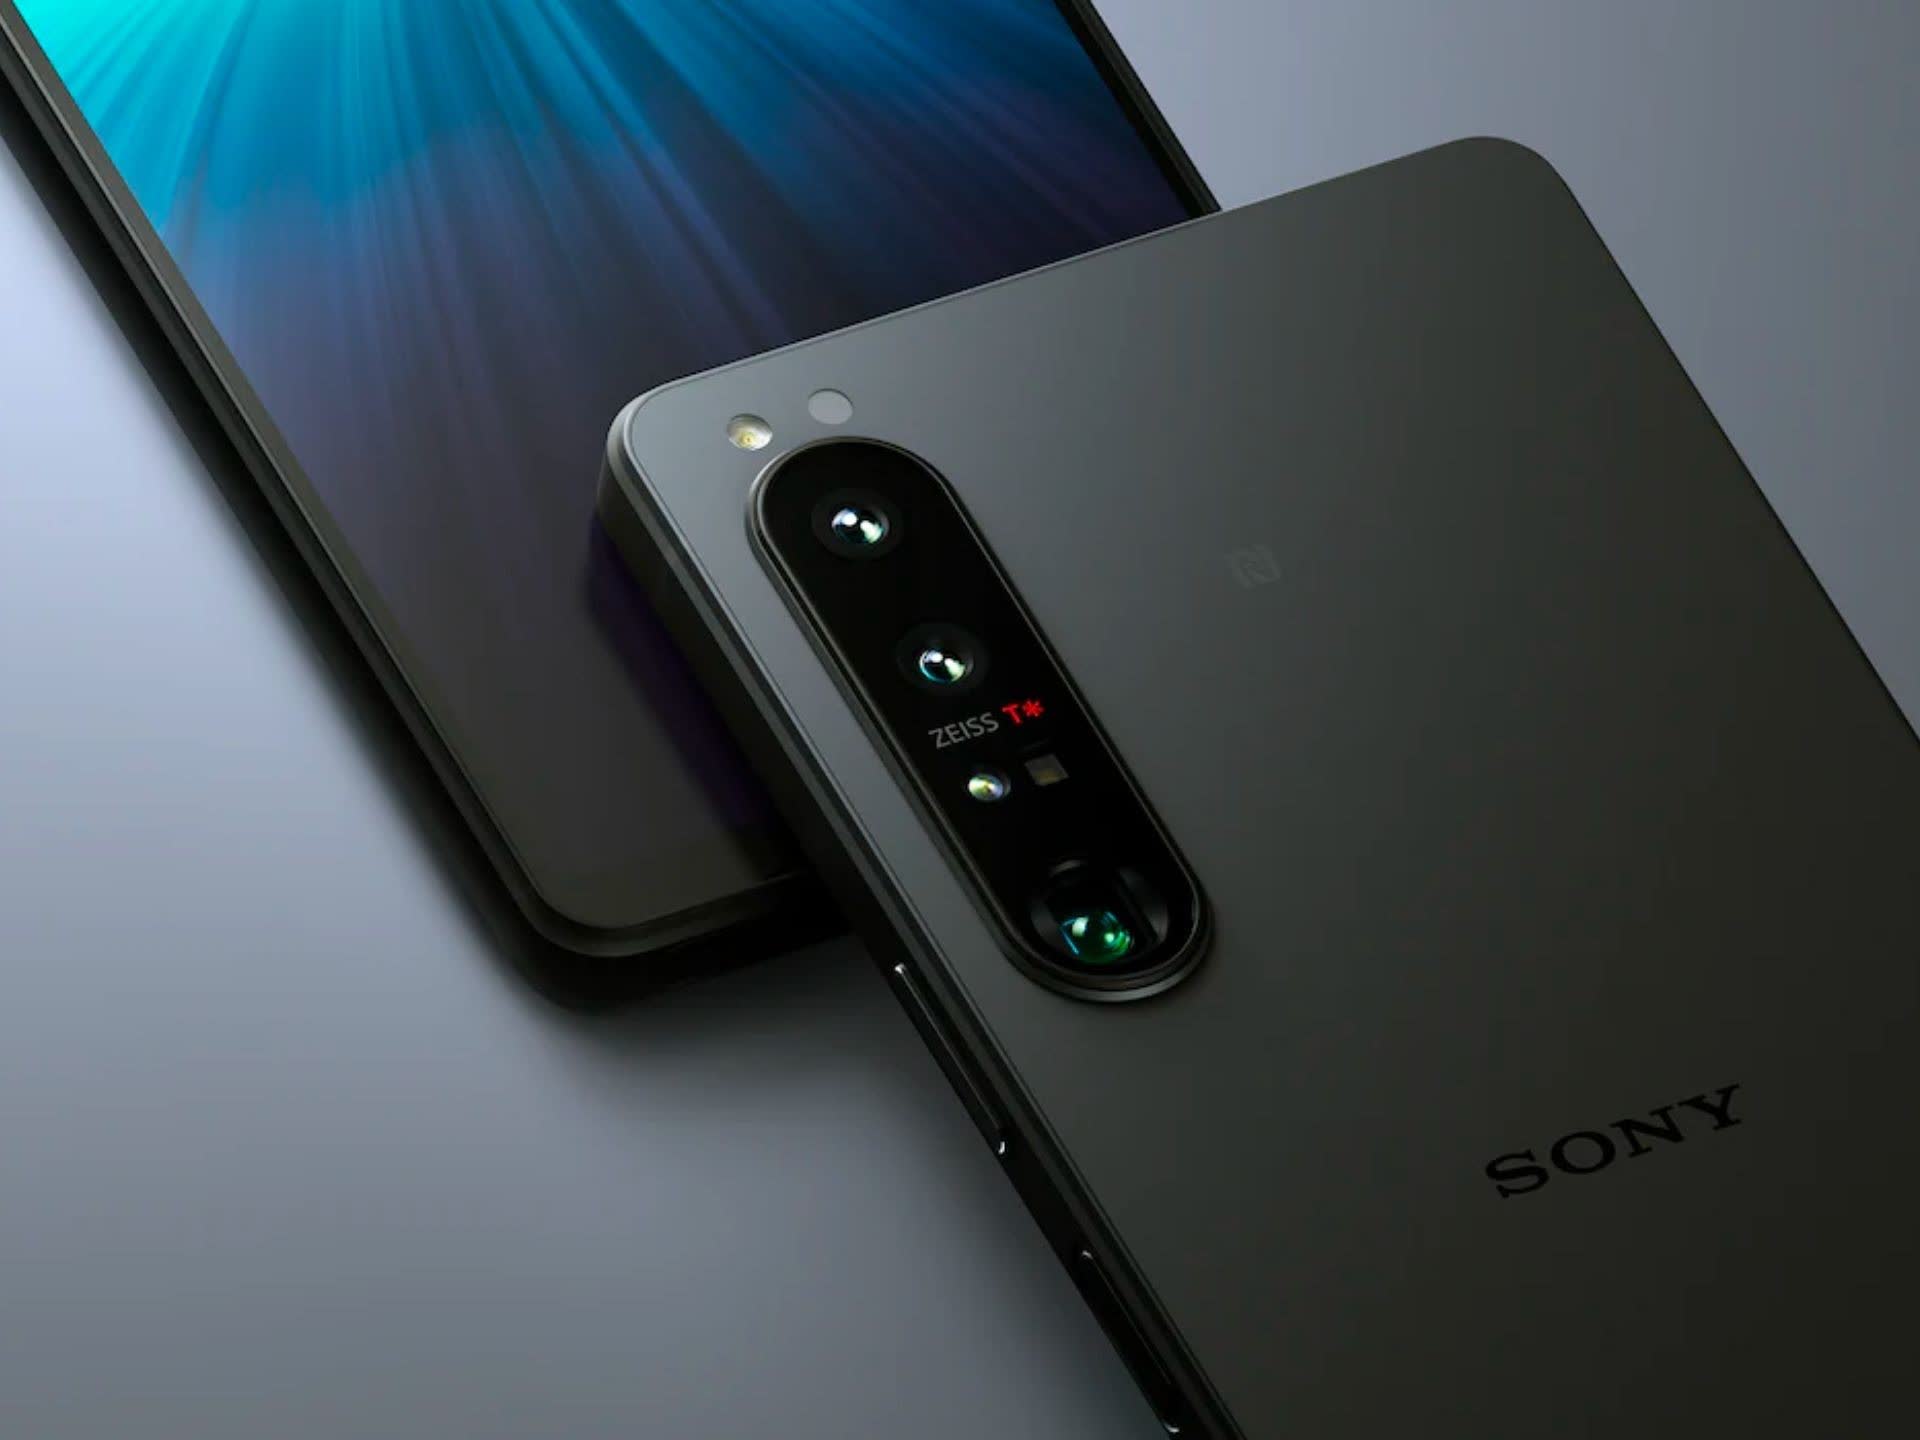 Sony believes phone cameras will eclipse DSLRs within a few years